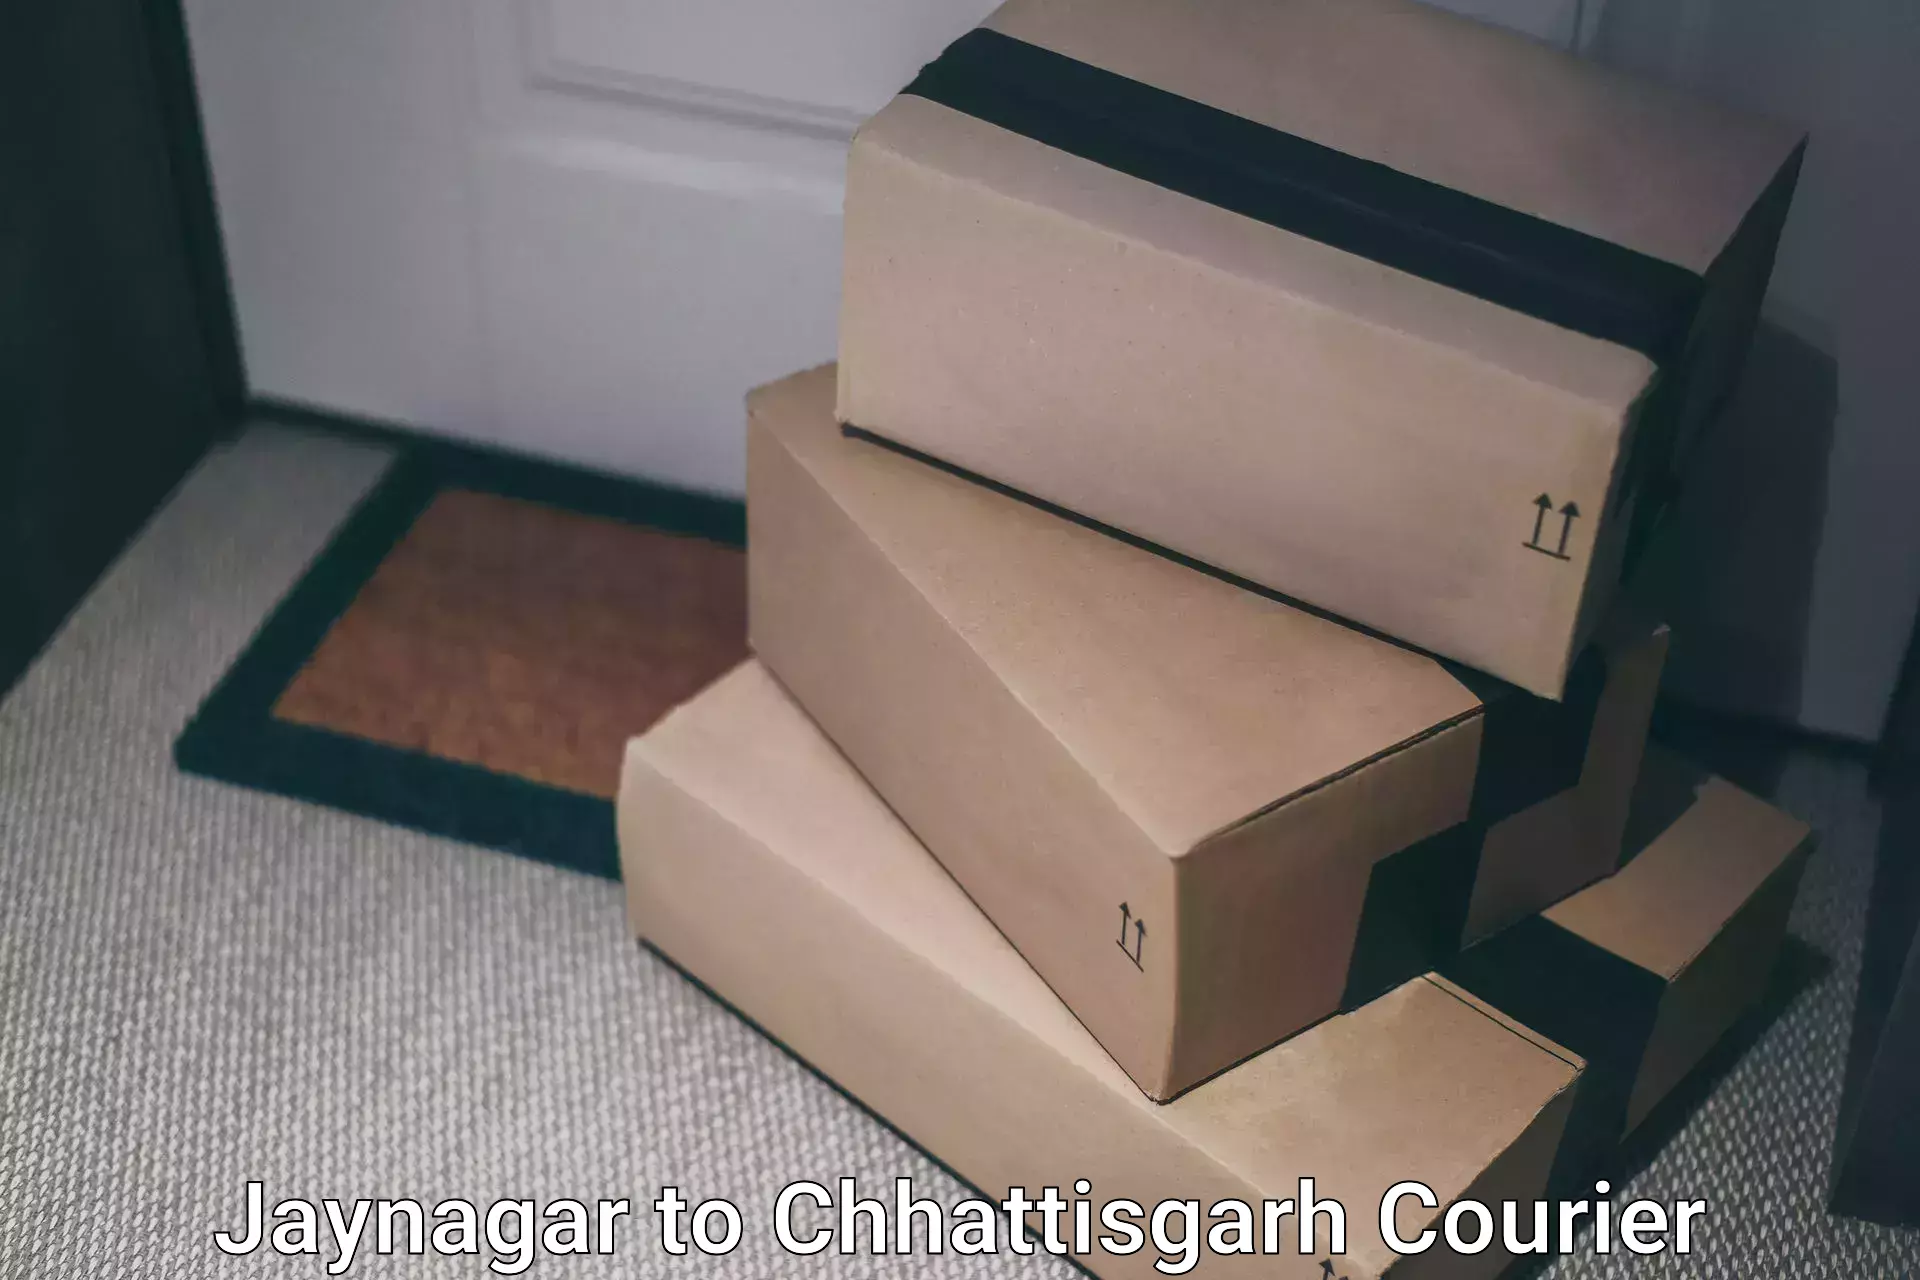 Same-day delivery options Jaynagar to Raigarh